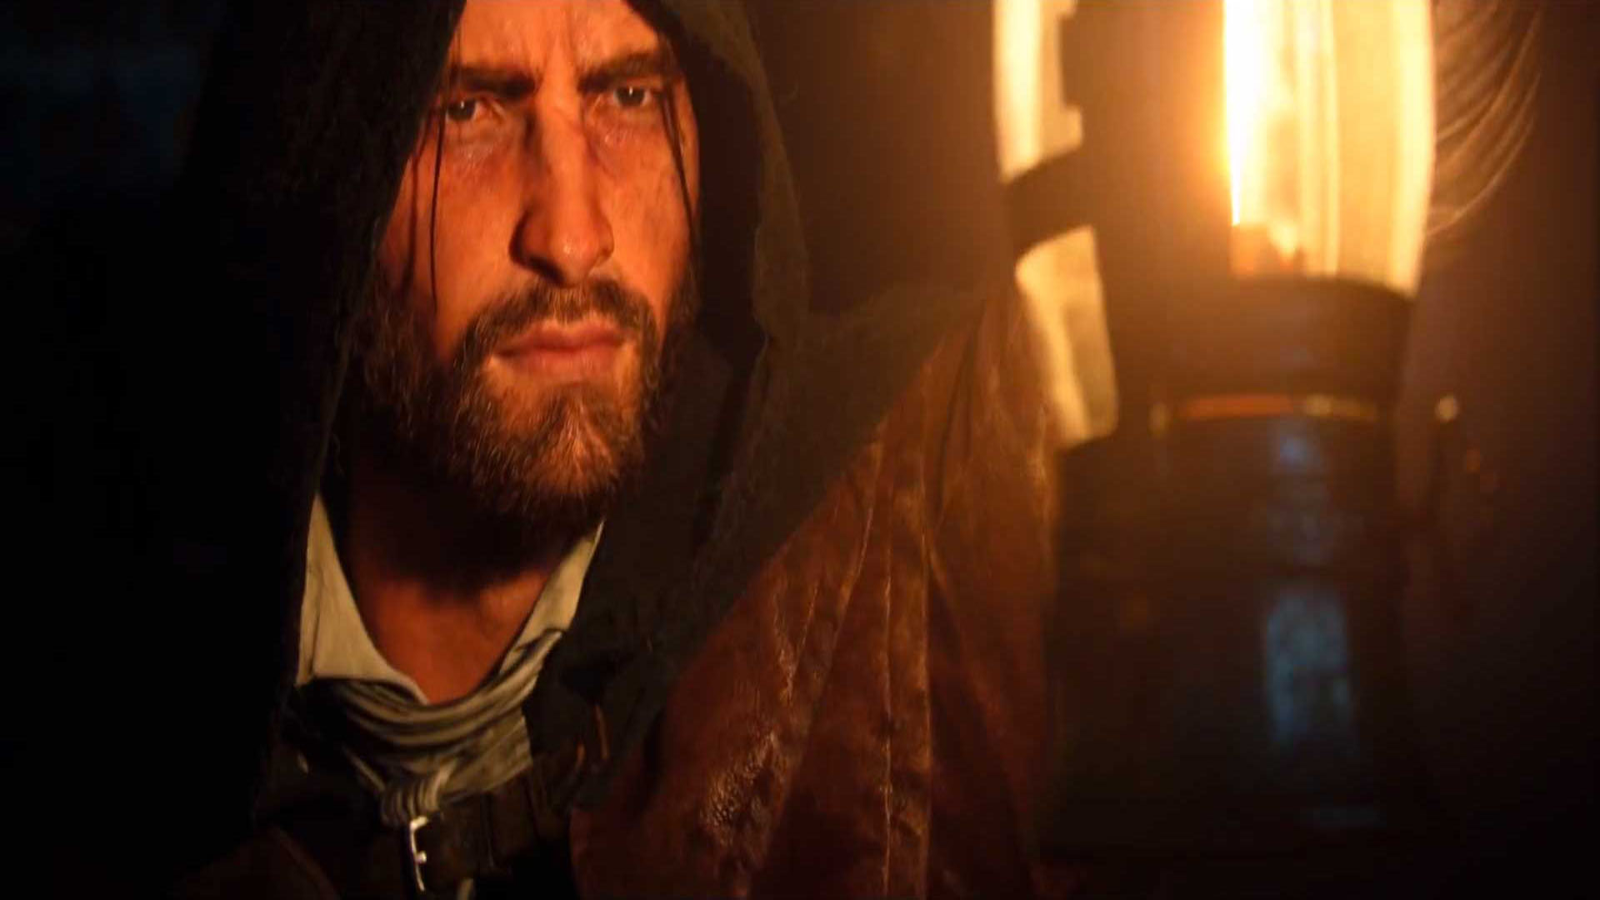 Dead Kings DLC Free for All Assassin's Creed Unity Players - IGN